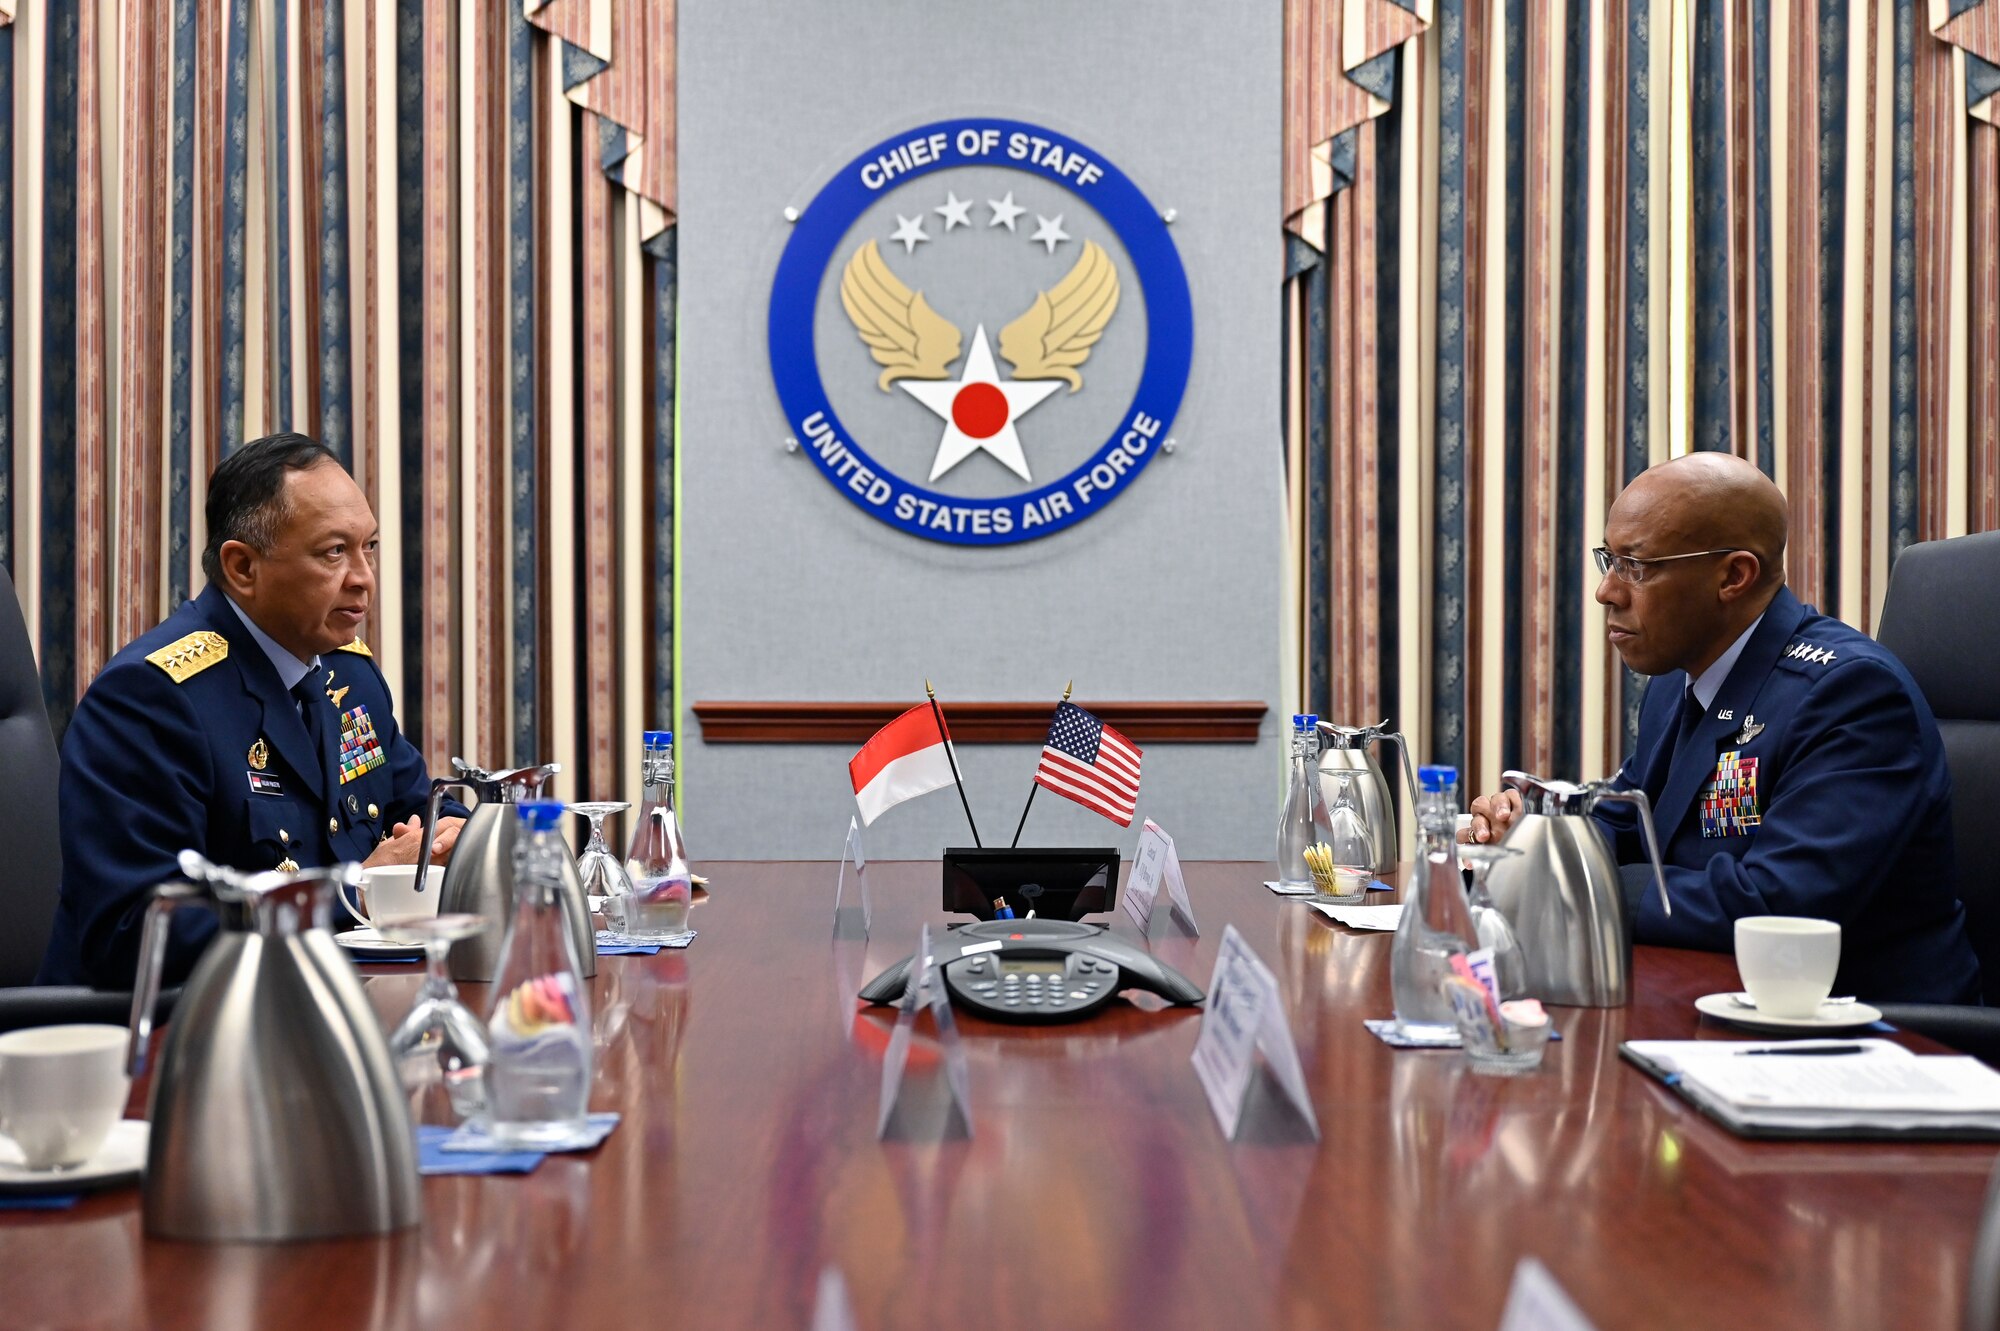 Air Chief Marshal Fadjar Prasetyo, left, chief of staff of the Indonesian Air Force, speaks with Air Force Chief of Staff Gen. CQ Brown, Jr.